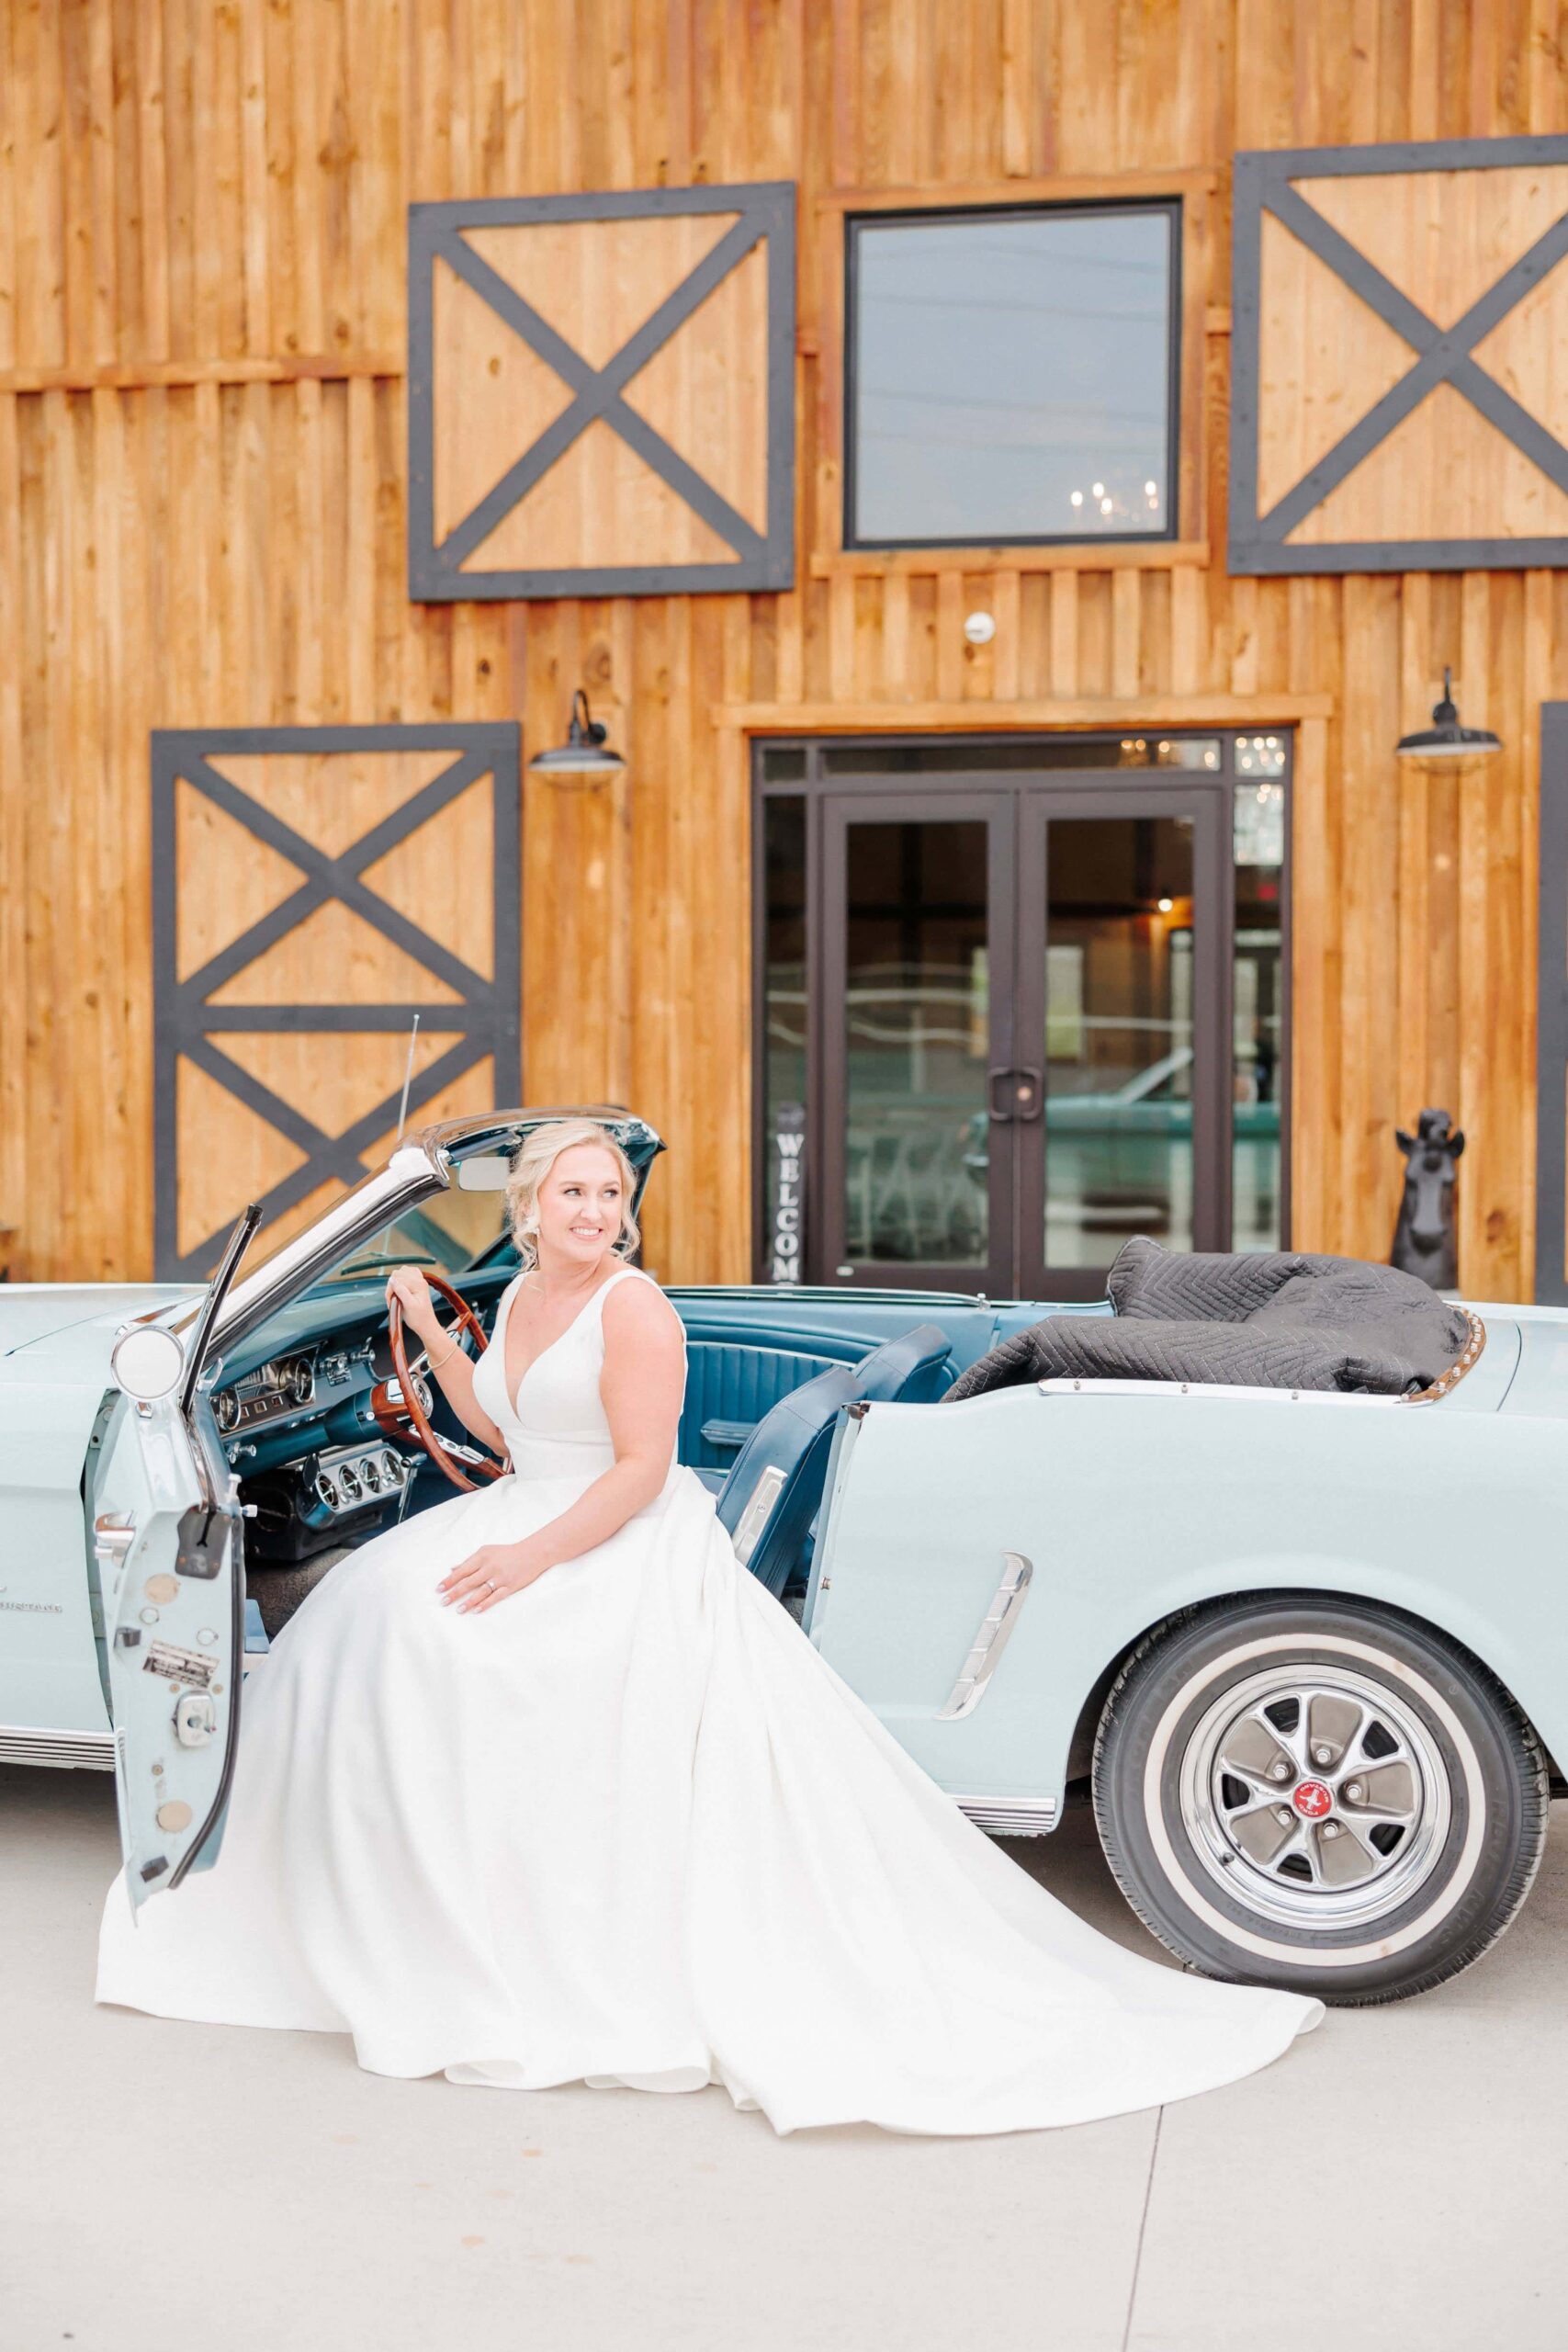 The bride and her classic car are parked in front of the wedding venue entrance for bridal photos.